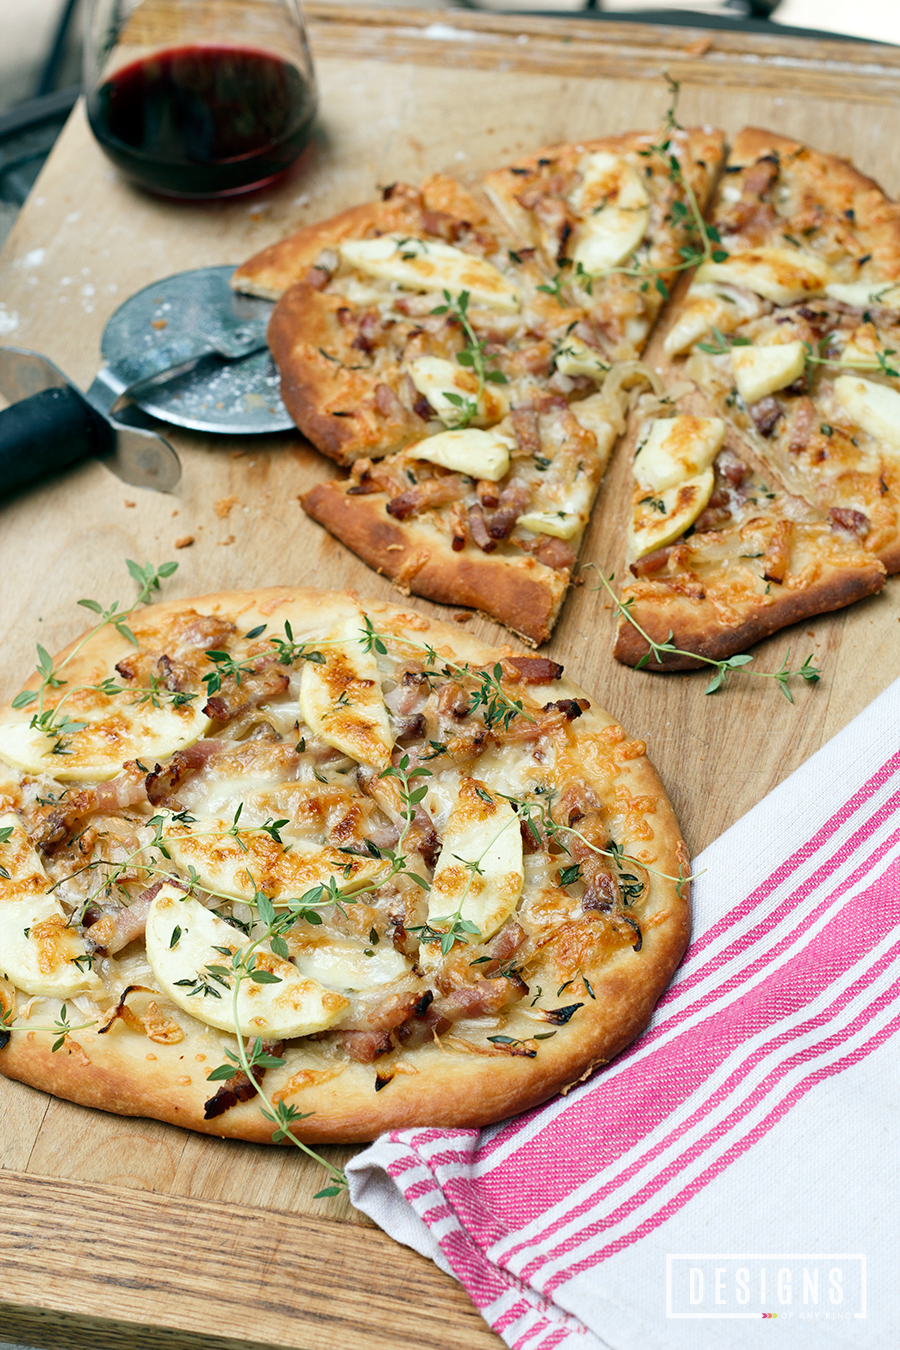 Bacon, Apple, Onion & White Cheddar Flatbread | Designs of Any Kind